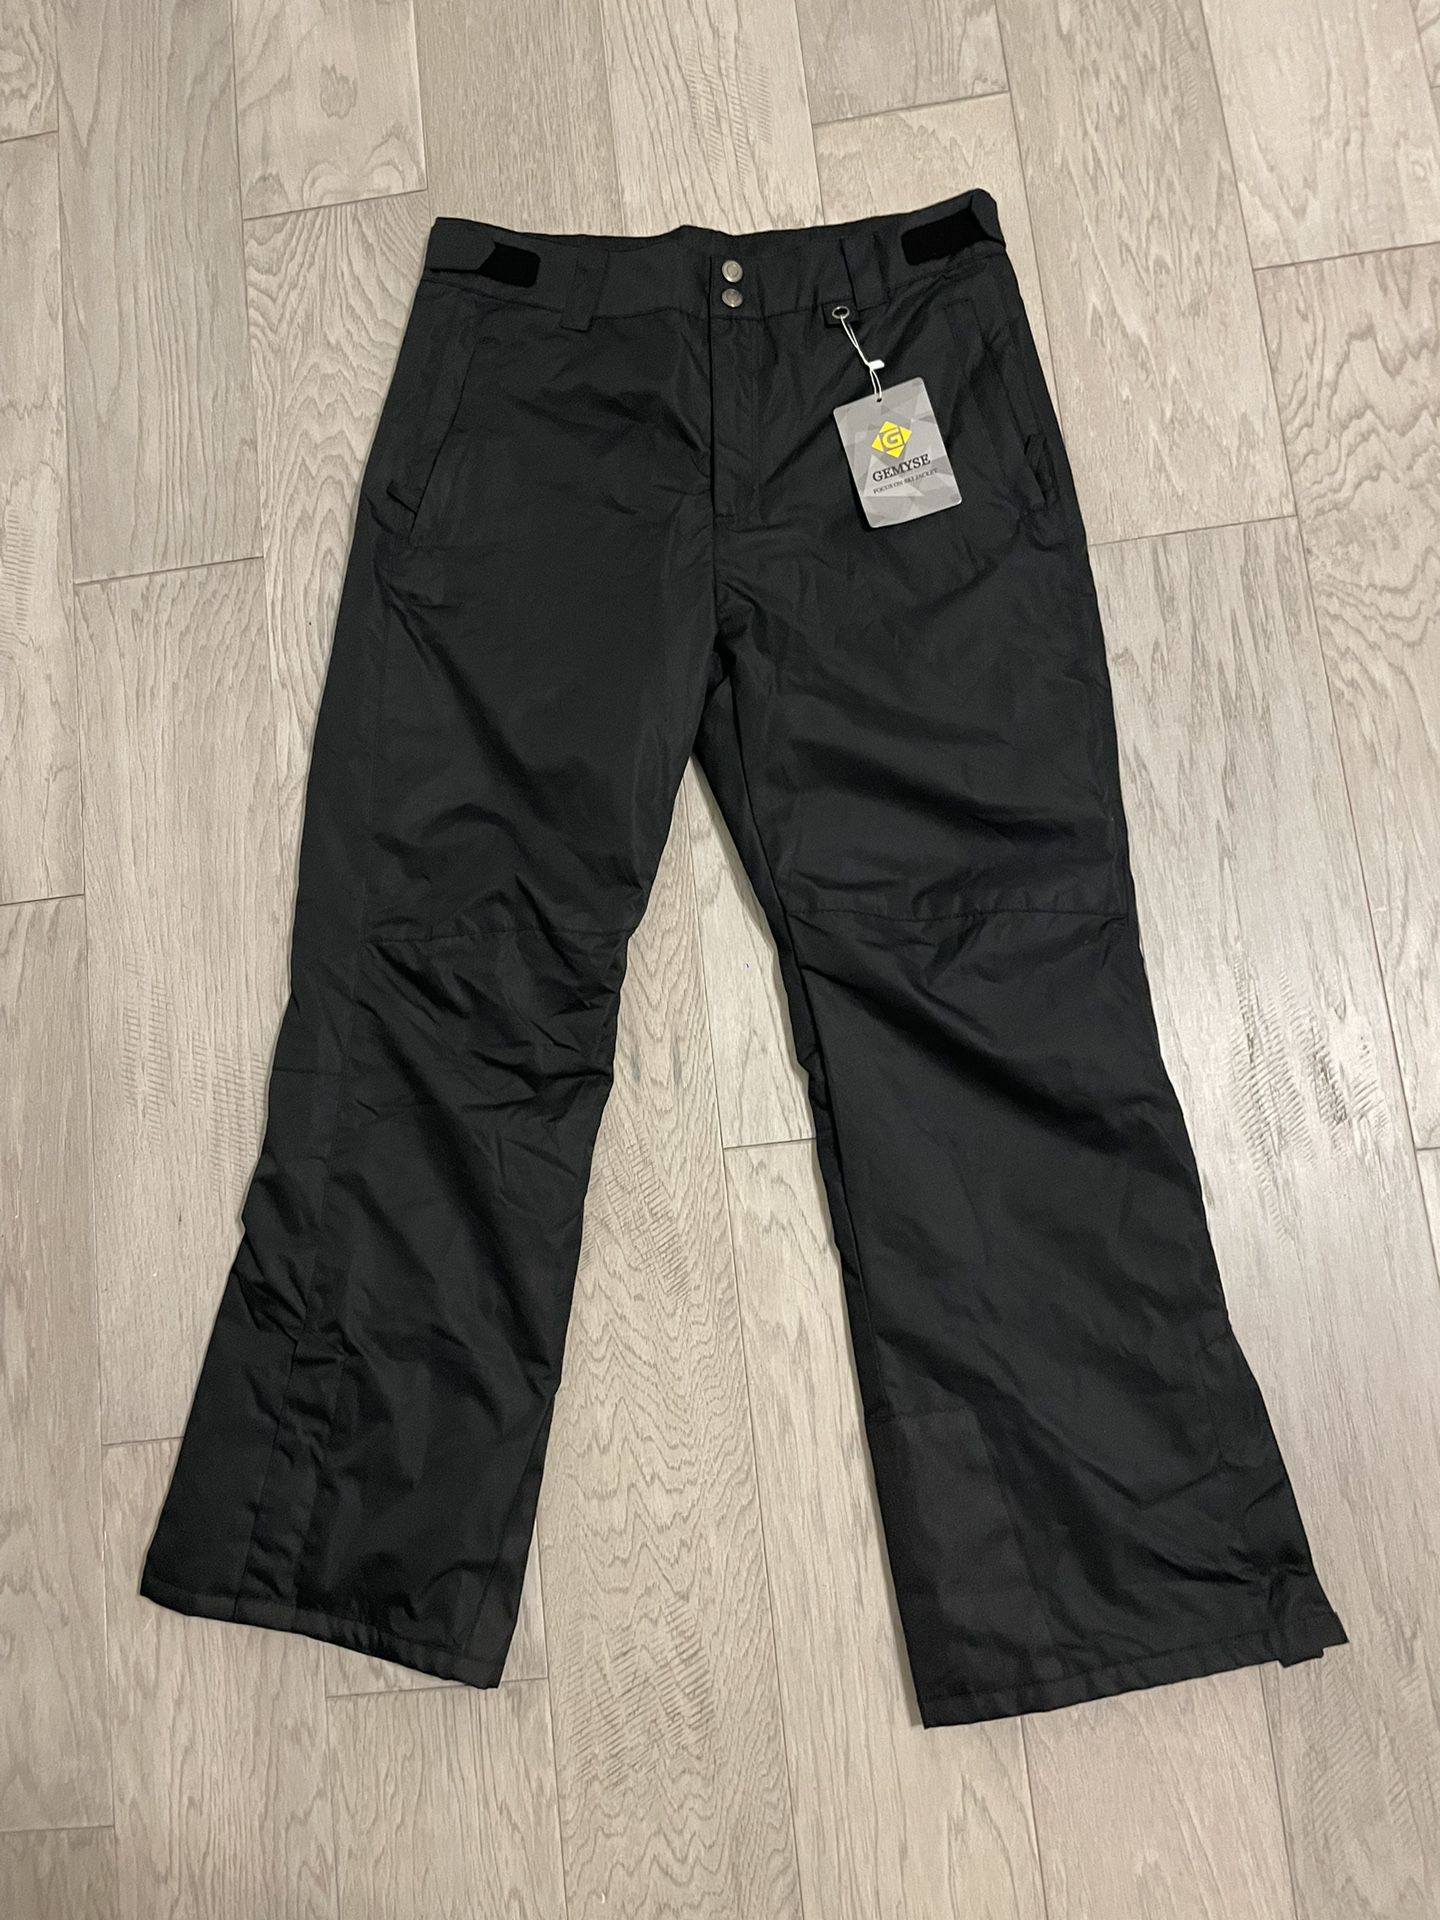 Gemyse Snow Ski Snow Pants for Sale in Garden Grove, CA - OfferUp